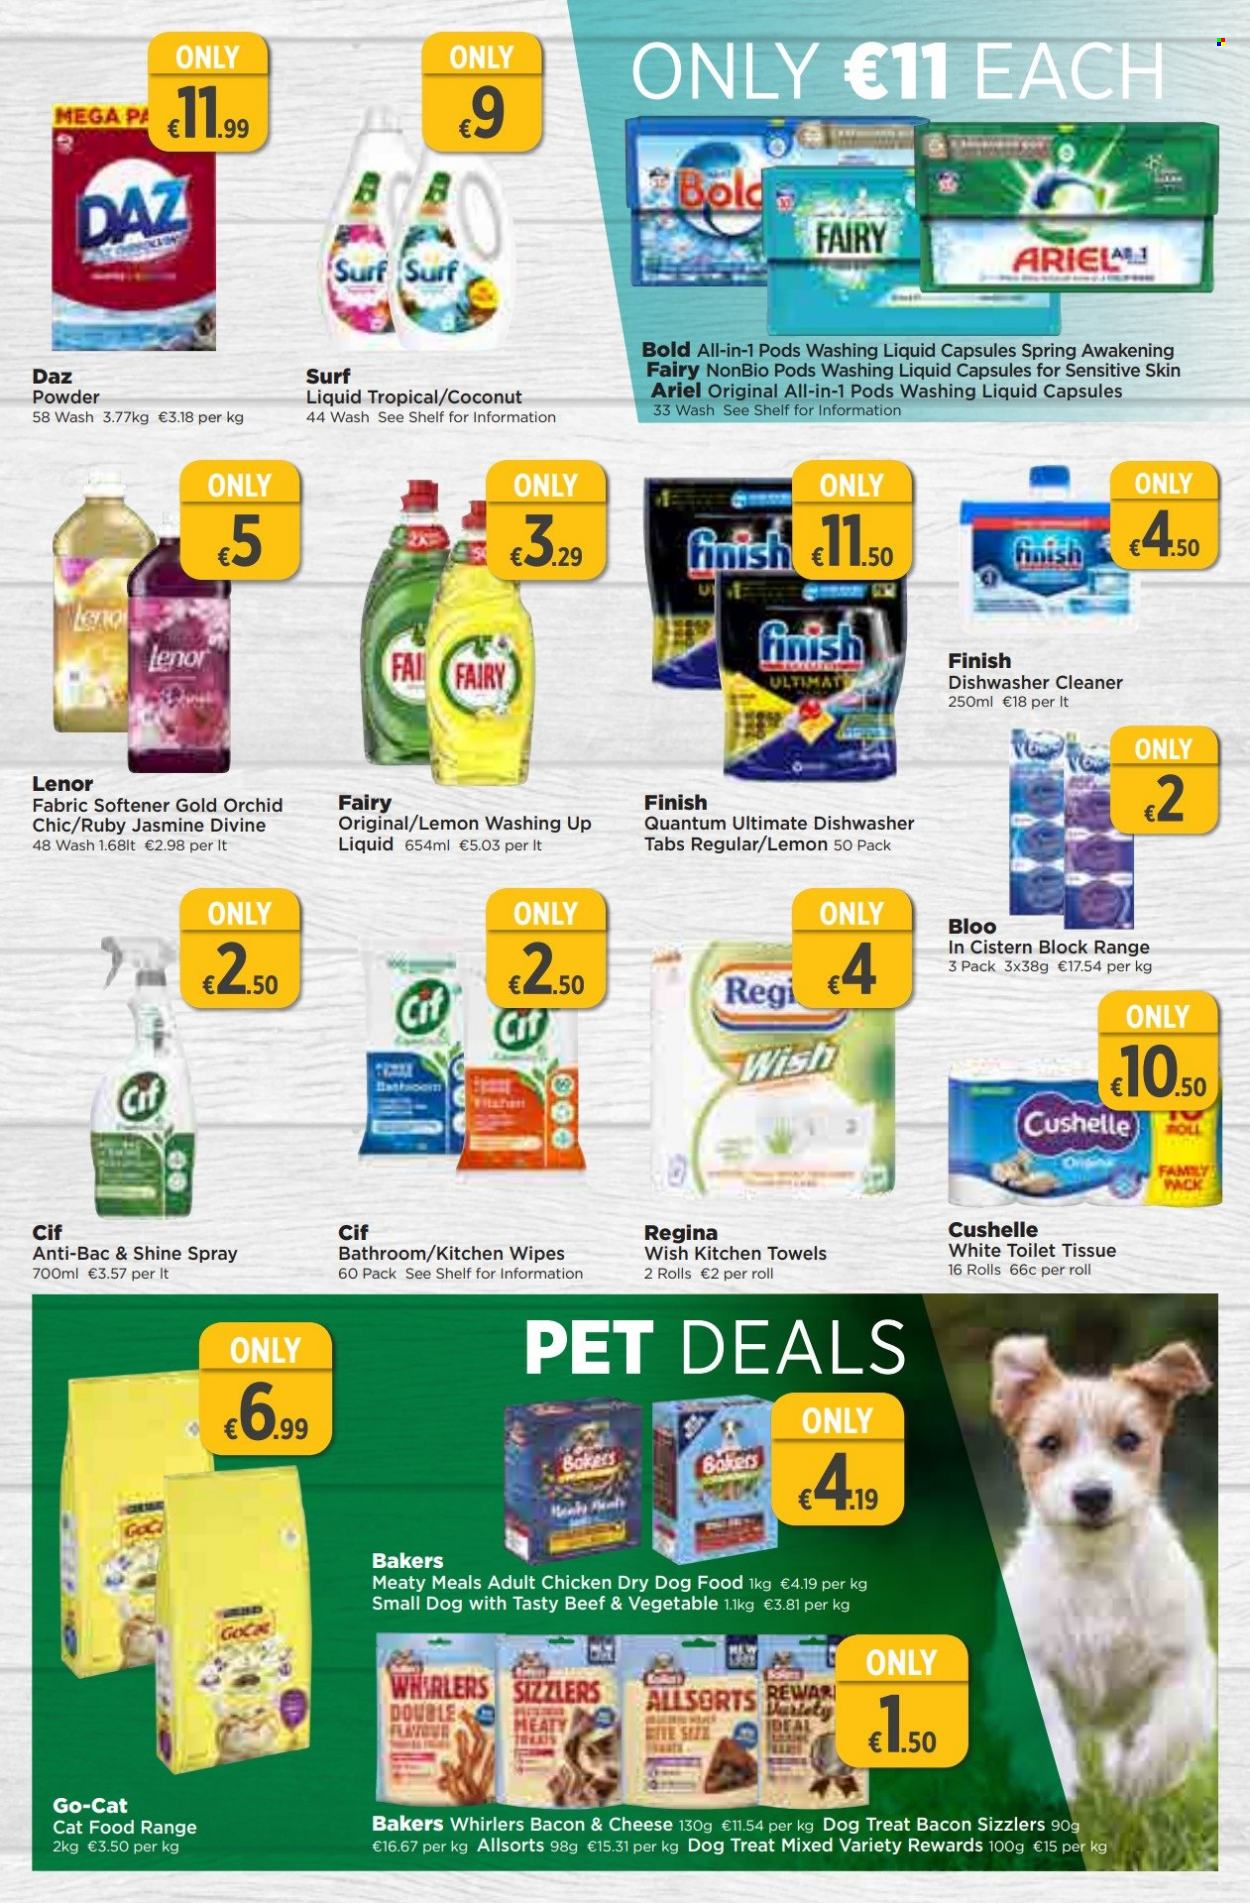 thumbnail - EUROSPAR offer  - 23.03.2023 - 12.04.2023 - Sales products - coconut, bacon, chicken, wipes, toilet paper, kitchen towels, Cushelle, cleaner, Fairy, Cif, fabric softener, Ariel, Surf, Daz Powder, Lenor, dishwashing liquid, dishwasher cleaner, Finish Powerball, Finish Quantum Ultimate, animal food, dry dog food, cat food, dog food, Go-Cat, Bakers. Page 13.